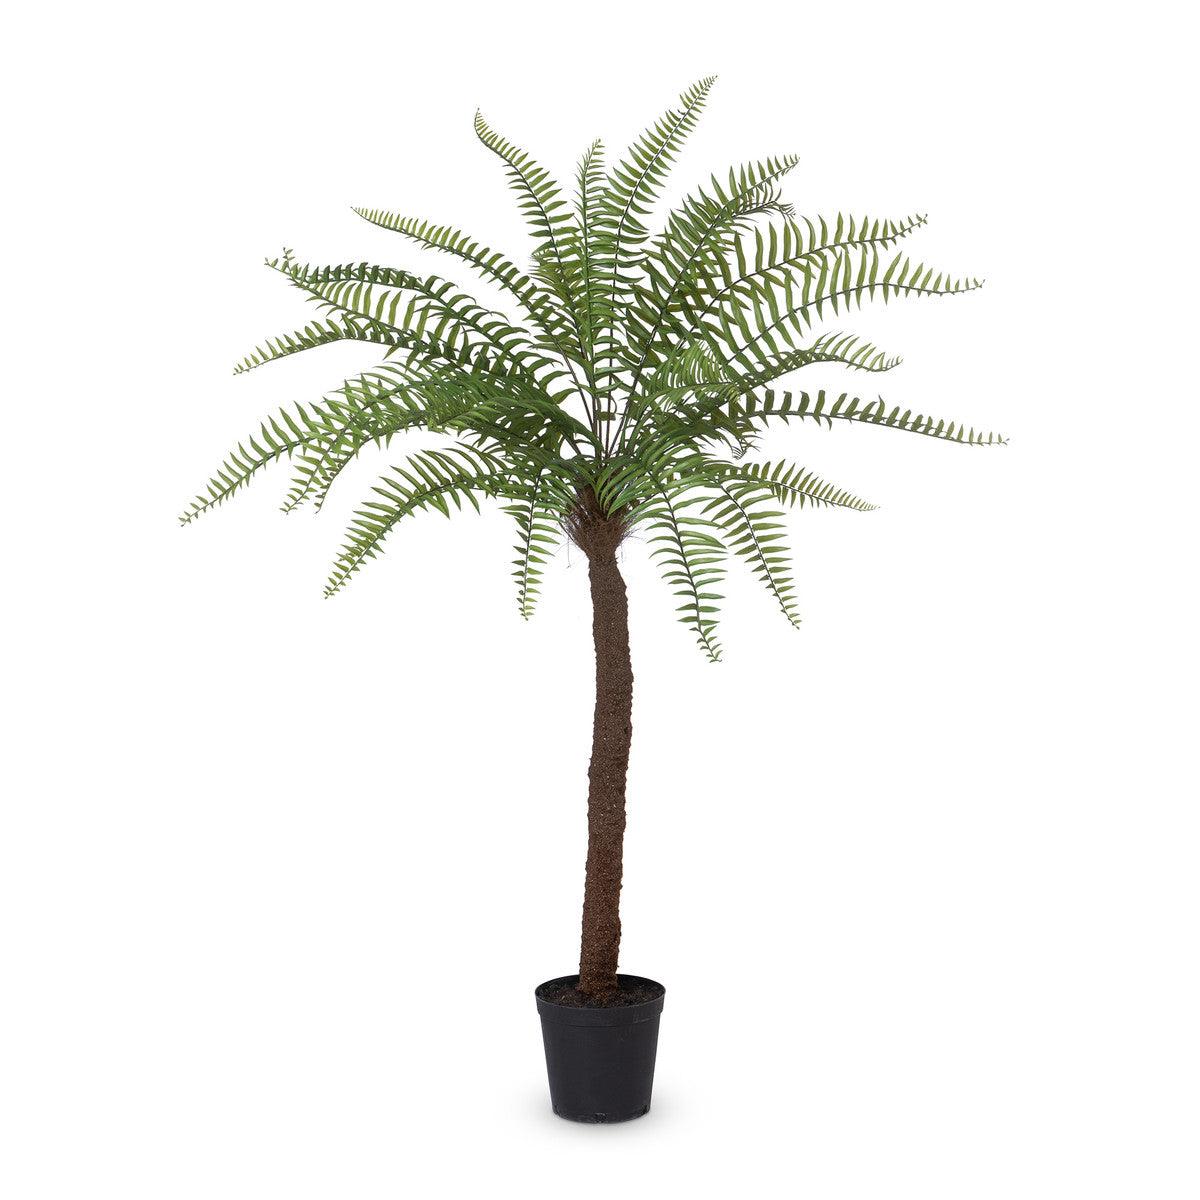 Giant Tree Fern in Growers Pot, 83 in. - Signastyle Boutique